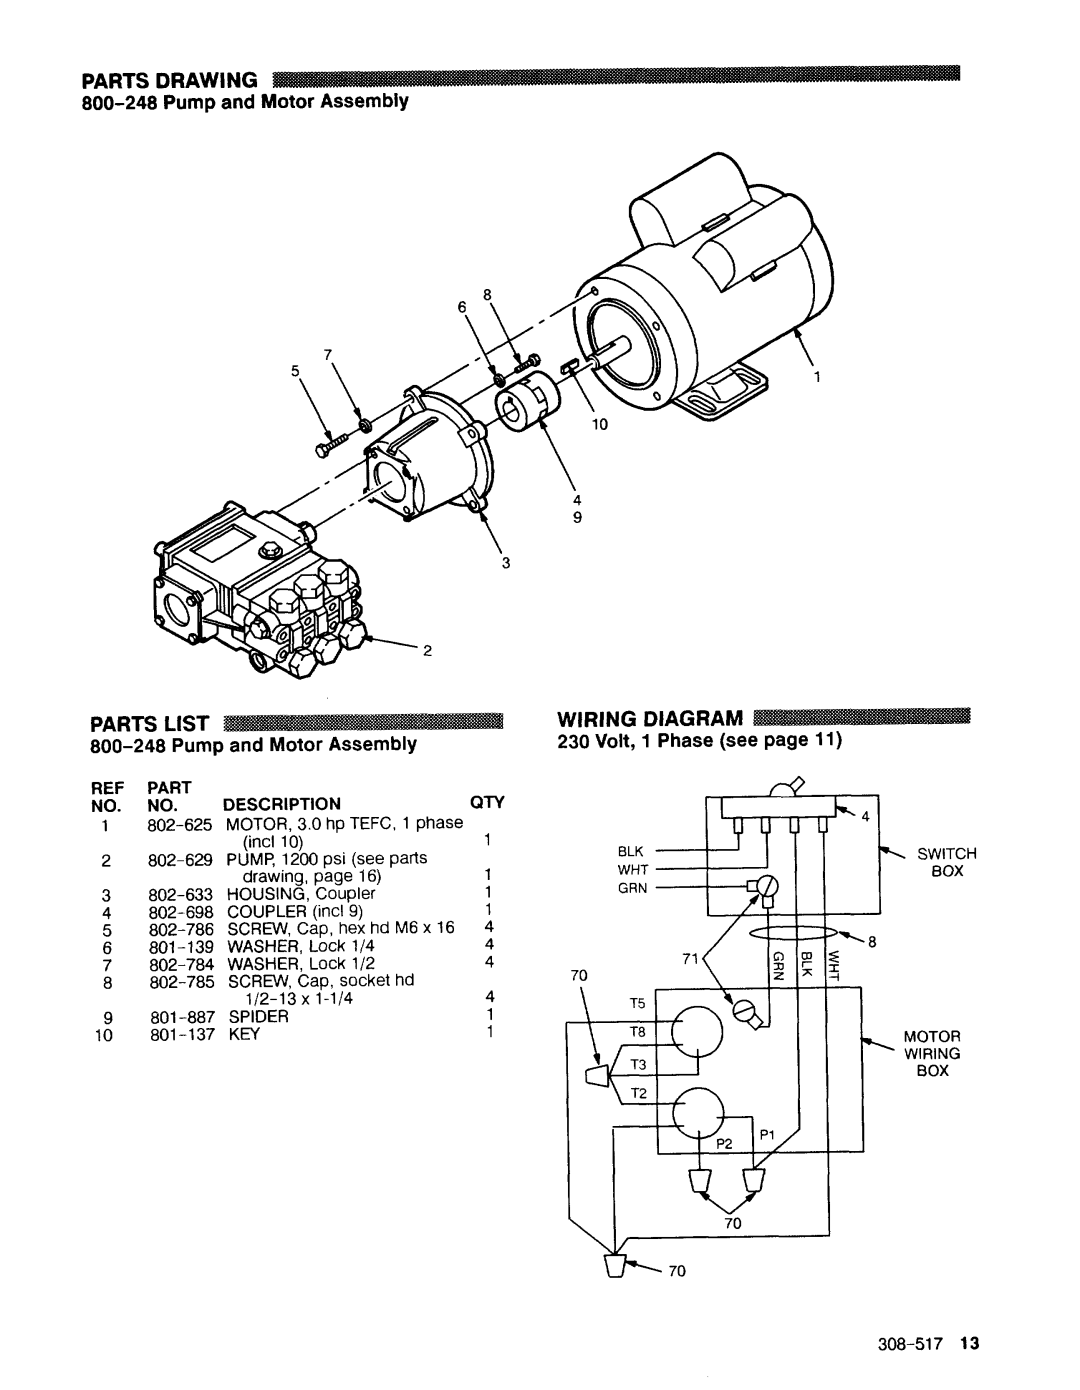 Graco Inc 308-517 800-248Pump and Motor Assembly, Fief, Volt, 1 Phase see page, Parts Drawing, Parts List, Wiring Diagram 